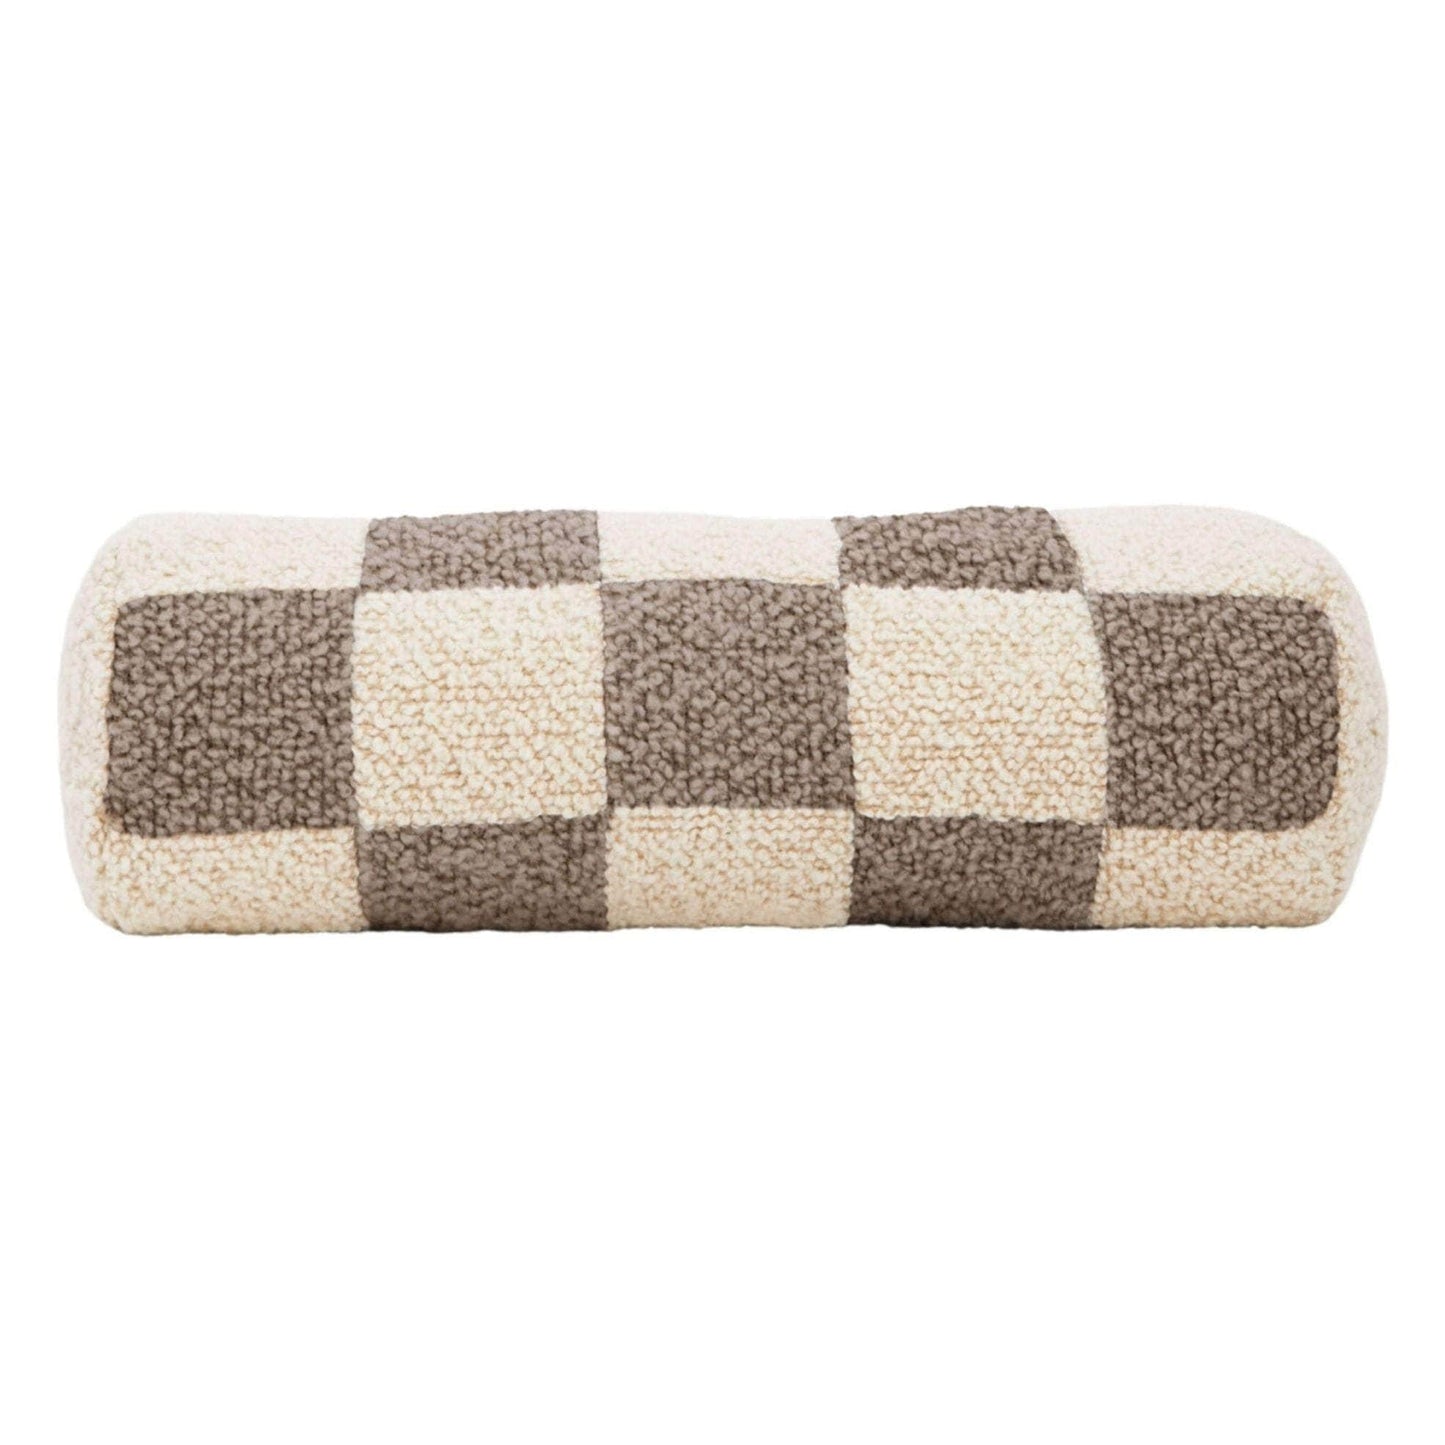 Le Cylindre - Wool Bouclé Checkered Bolster Sawdust/Eggshell